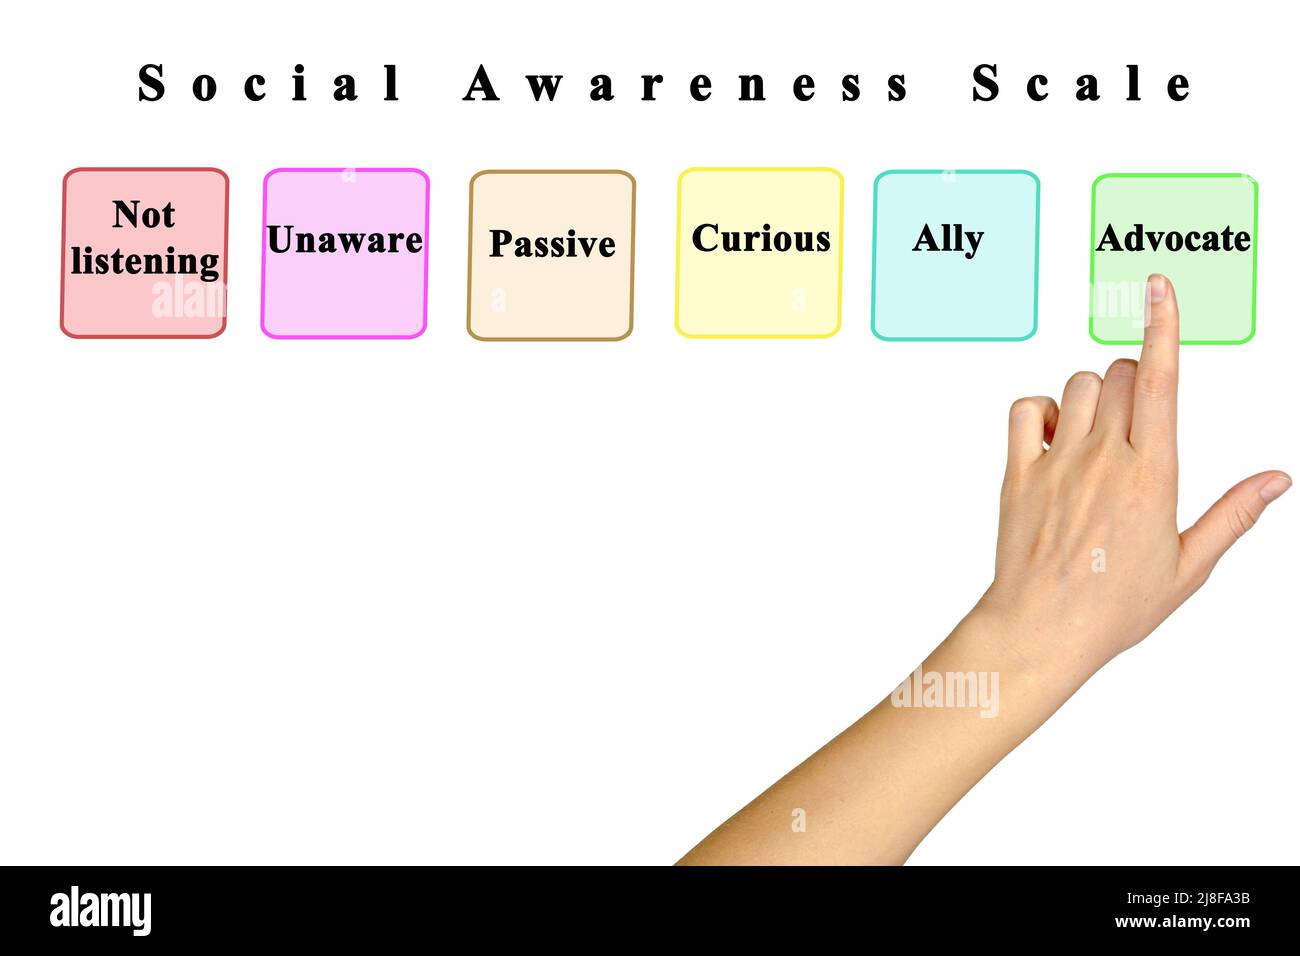 Scale for Social Awareness Degrees Stock Photo - Alamy